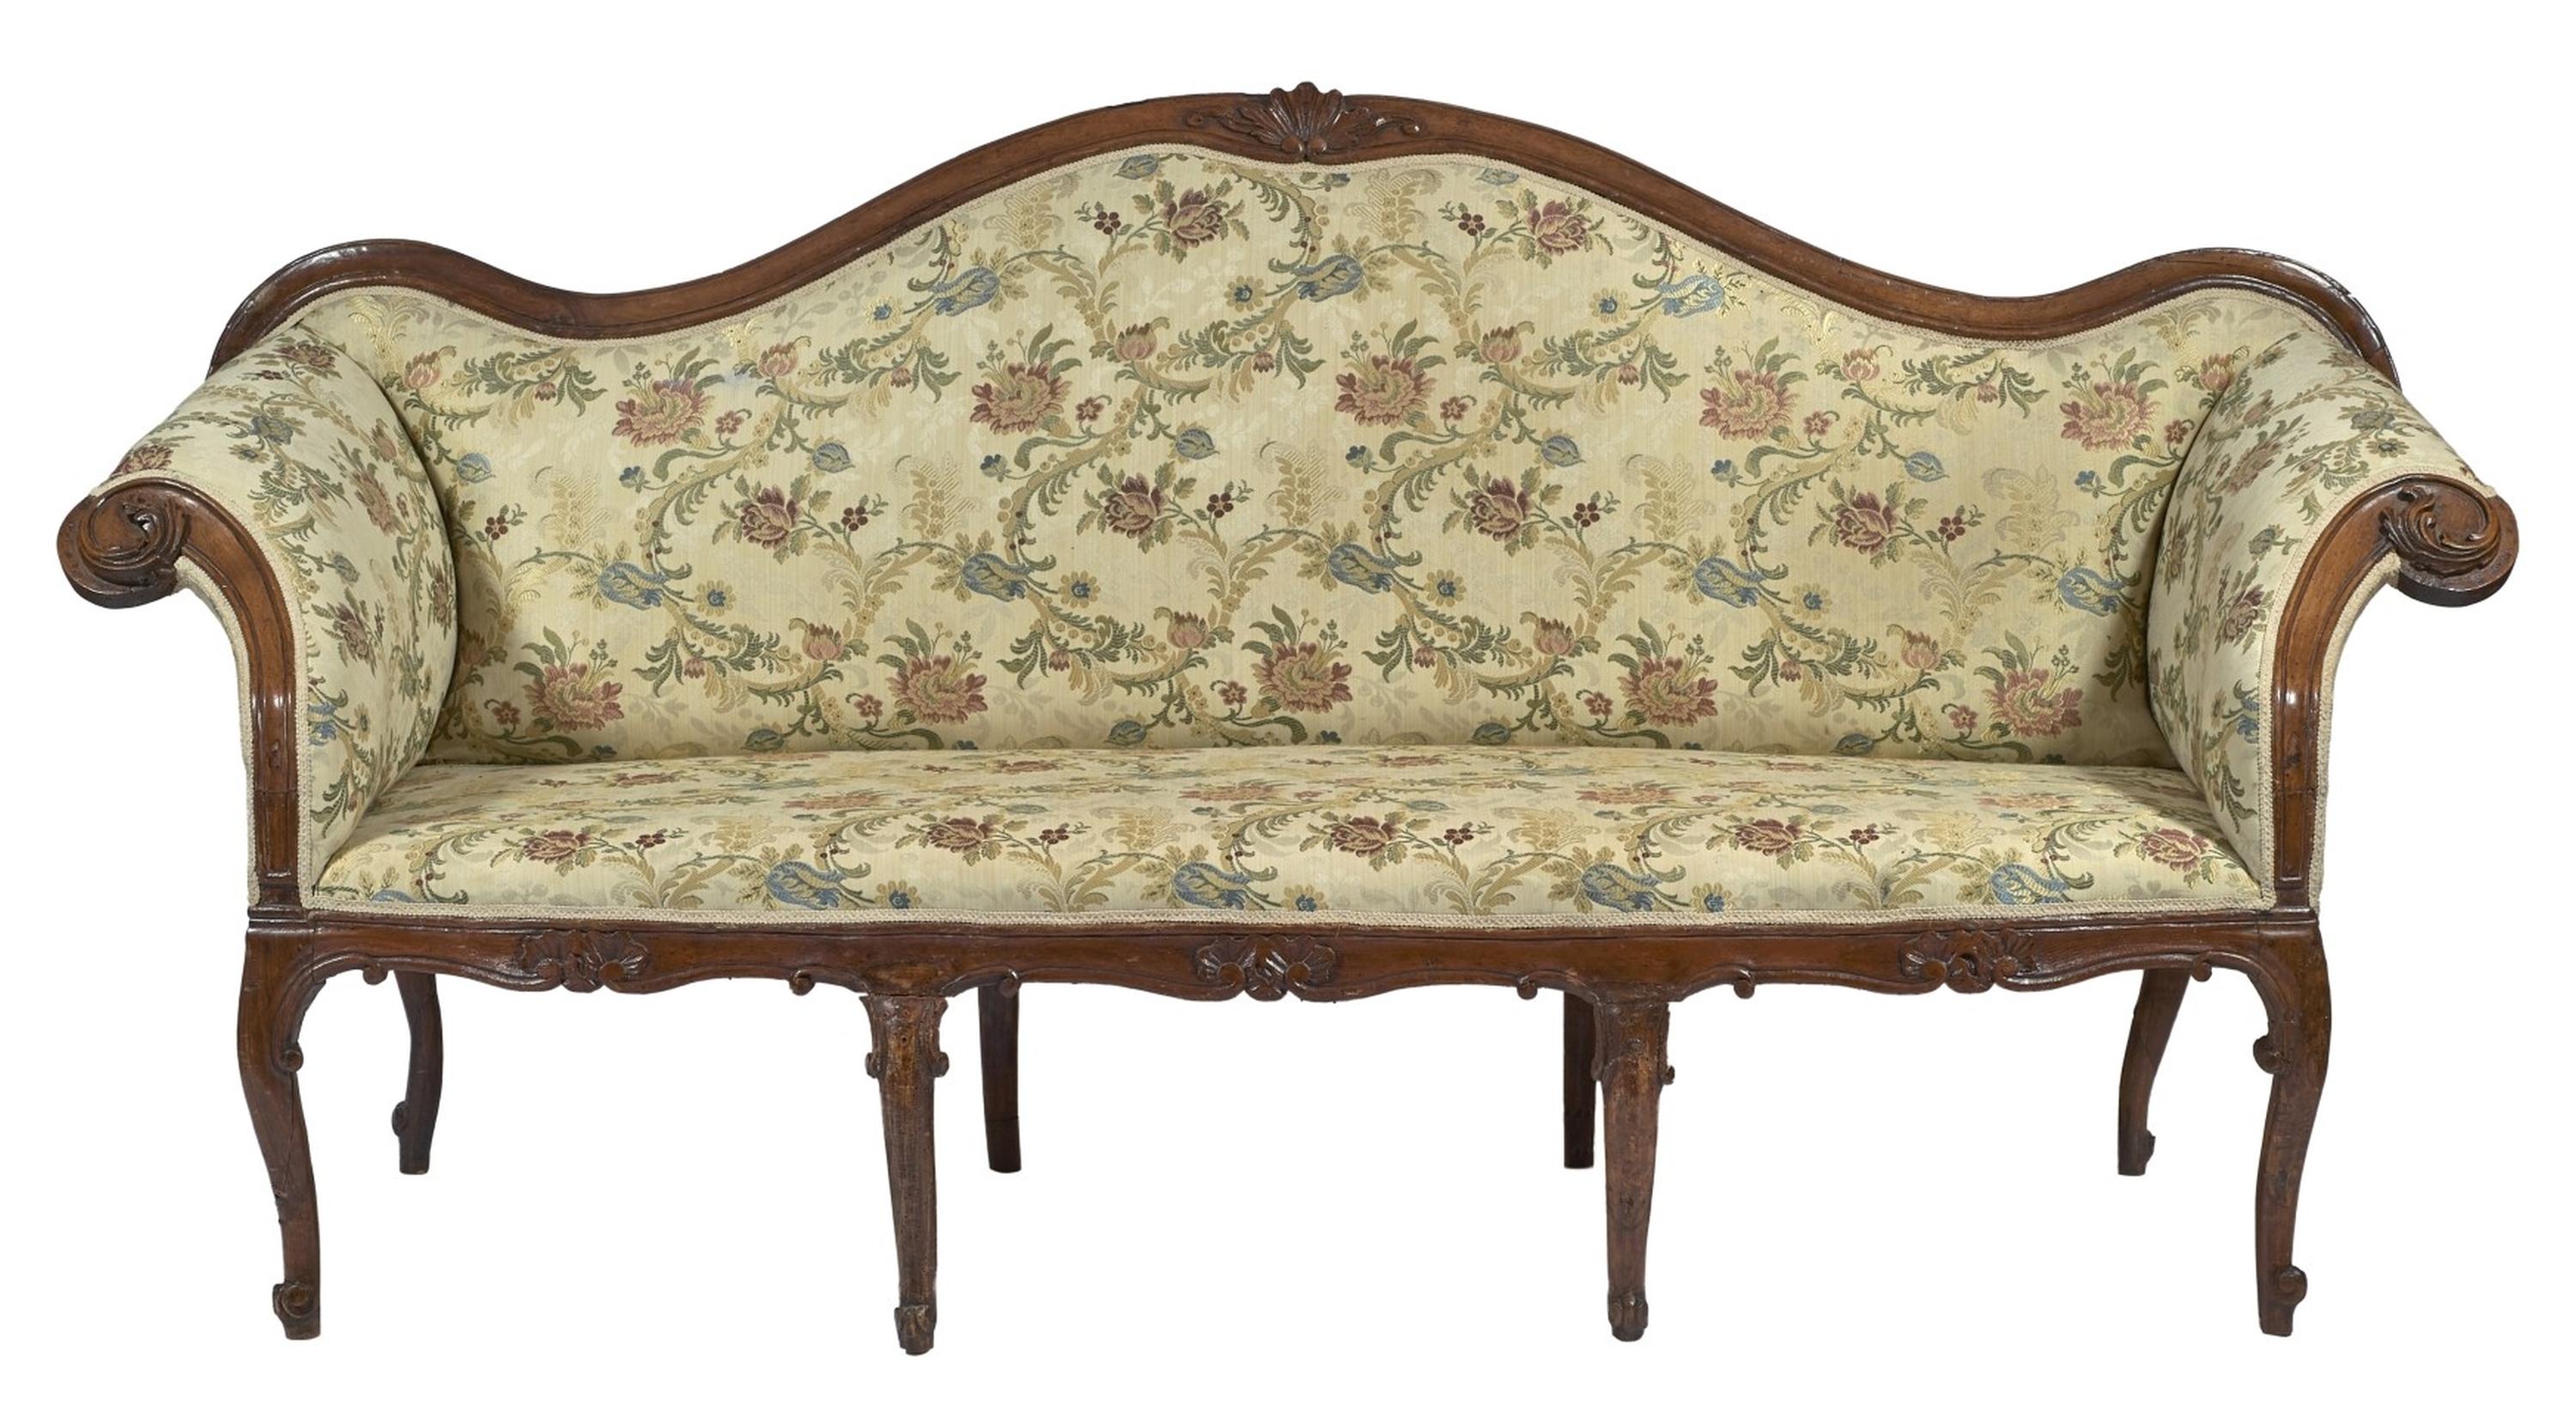 Sweet and wavy Italian winged sofa in walnut from the first half of the 18th century. with delicate fabric and absolutely of great value. 

Exceptional sofa, soft, refined possibly also from the center with a harmonious movement able to easily